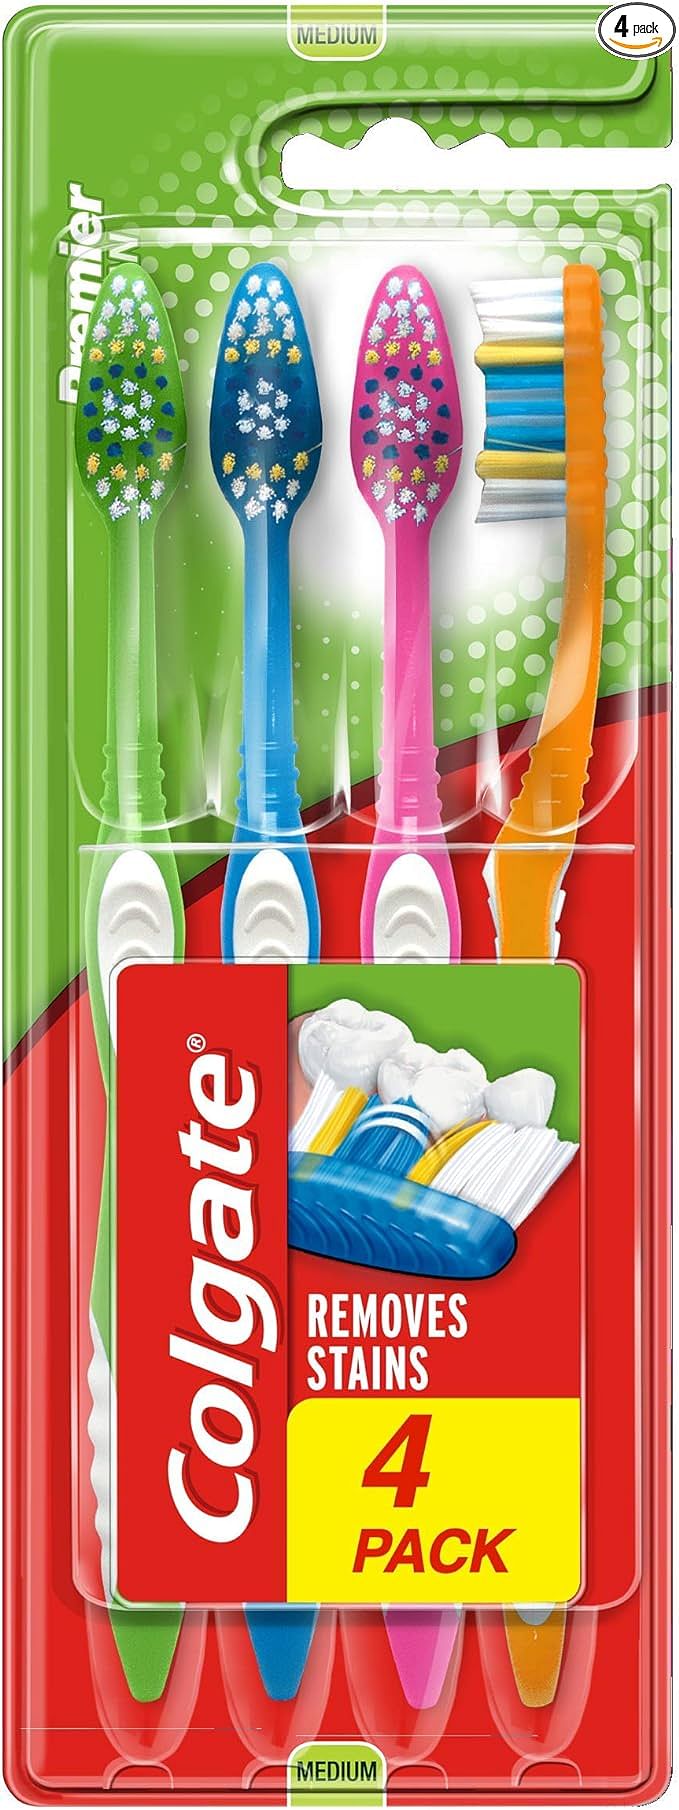 Colgate Toothbrushes Pack of 4 - One Size - Multicolored